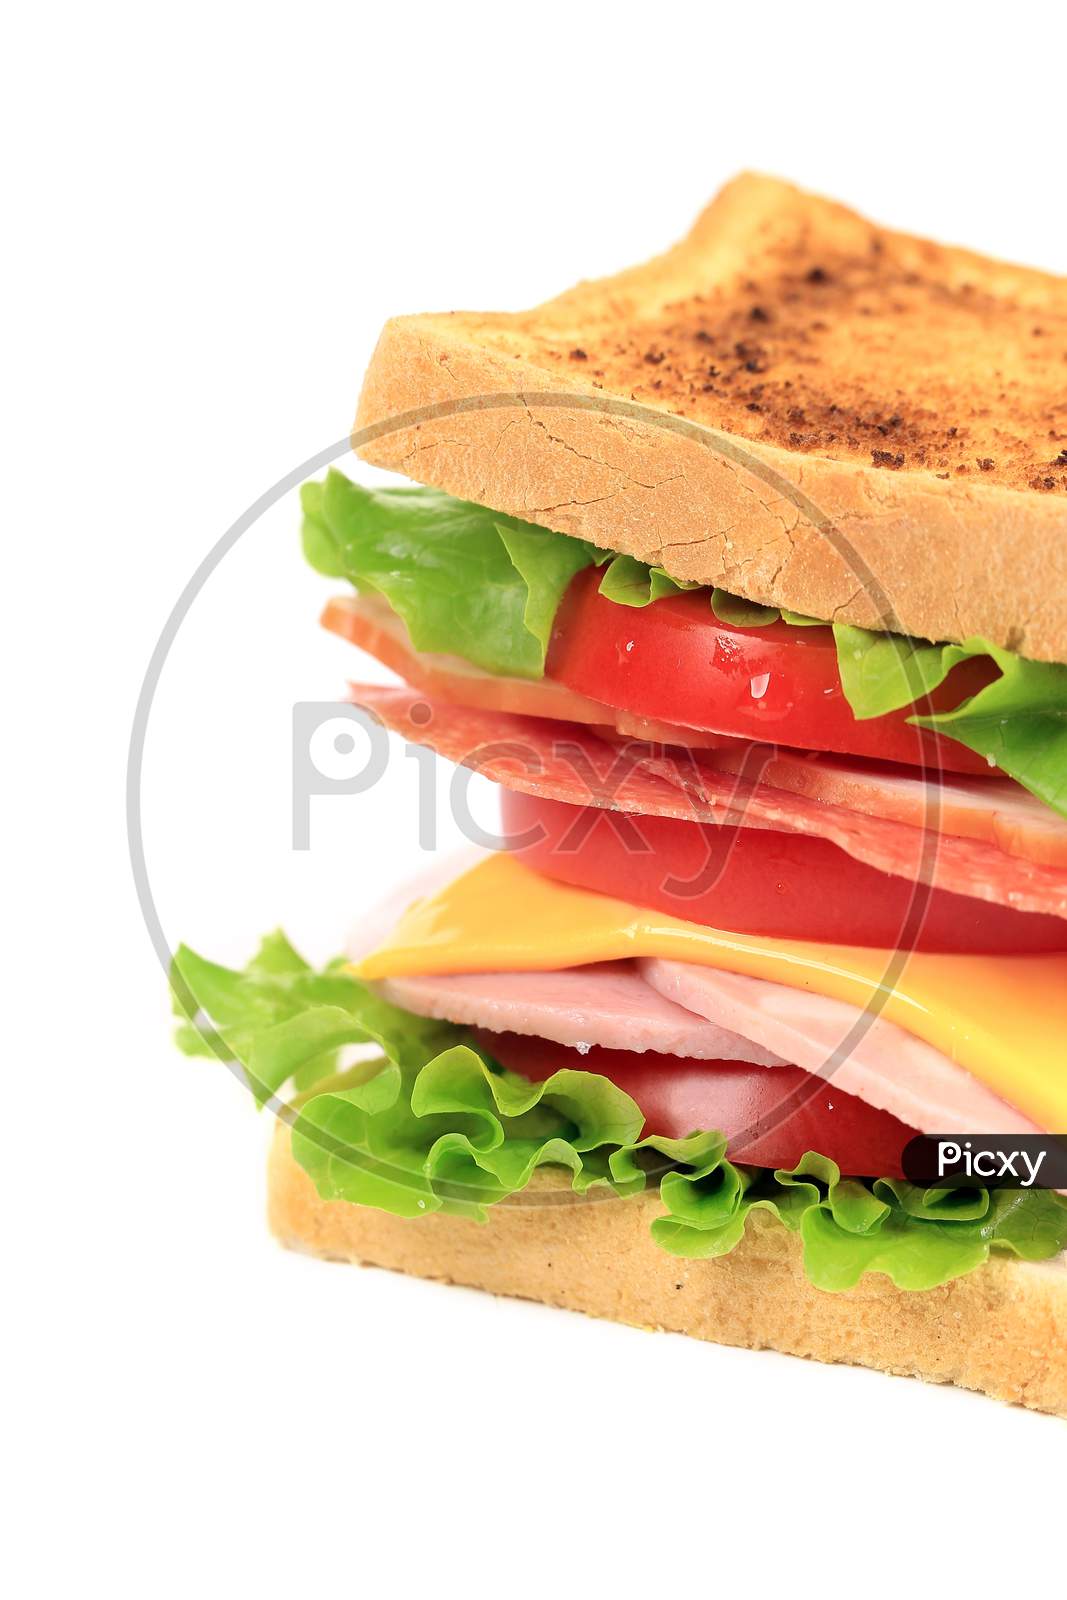 Sandwich With Bacon And Vegetables. Whole Background.